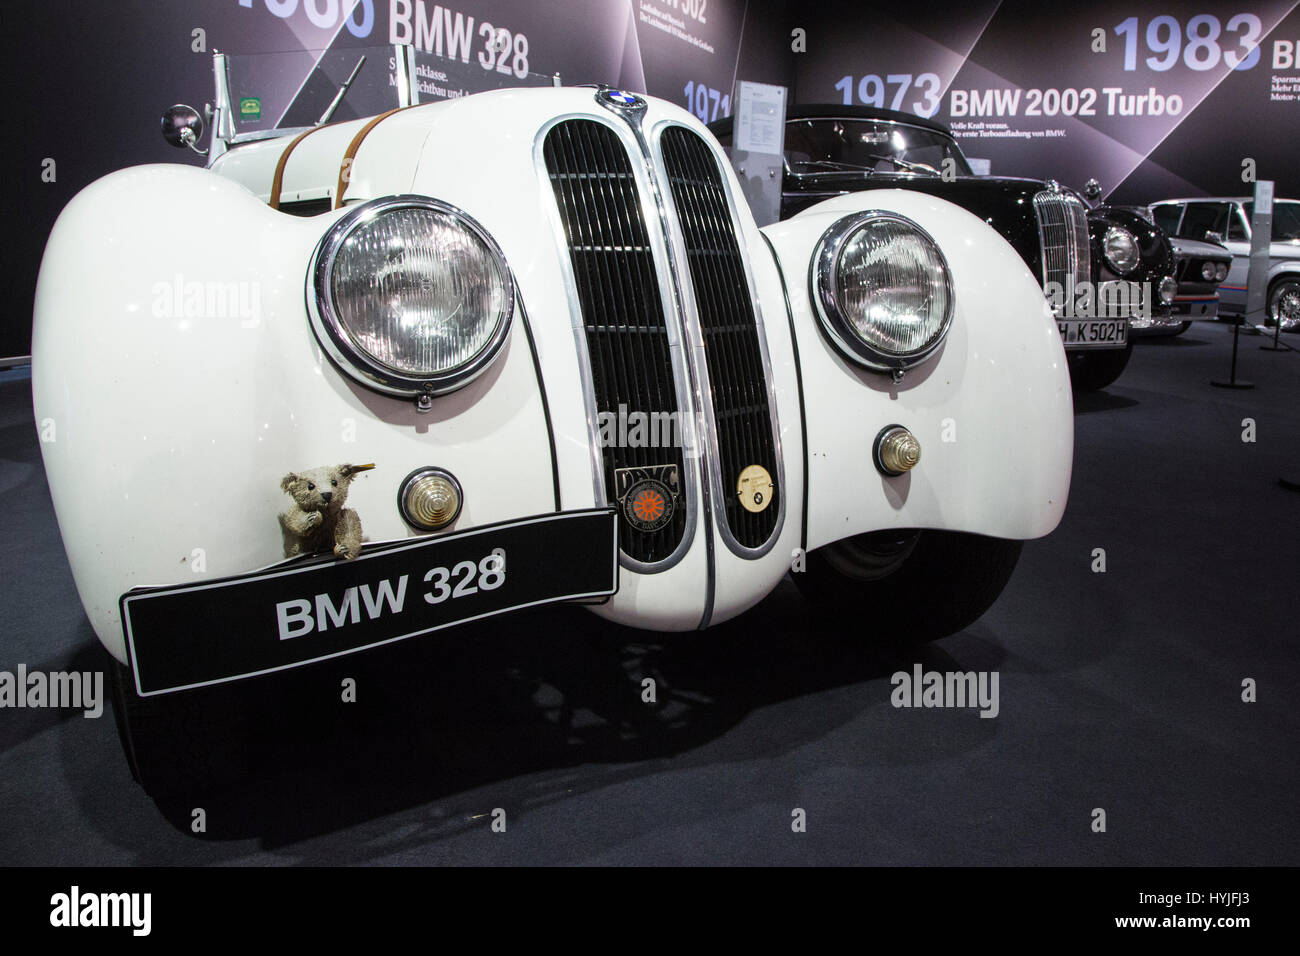 Essen, Germany. 5th Apr, 2017. A 1936 BMW 328. Press preview of the 29th Techno-Classica motor show in Essen, show for vintage, classic and prestige cars and motor sports. The motor show runs from 5 to 9 April 2017. Credit: OnTheRoad/Alamy Live News Stock Photo